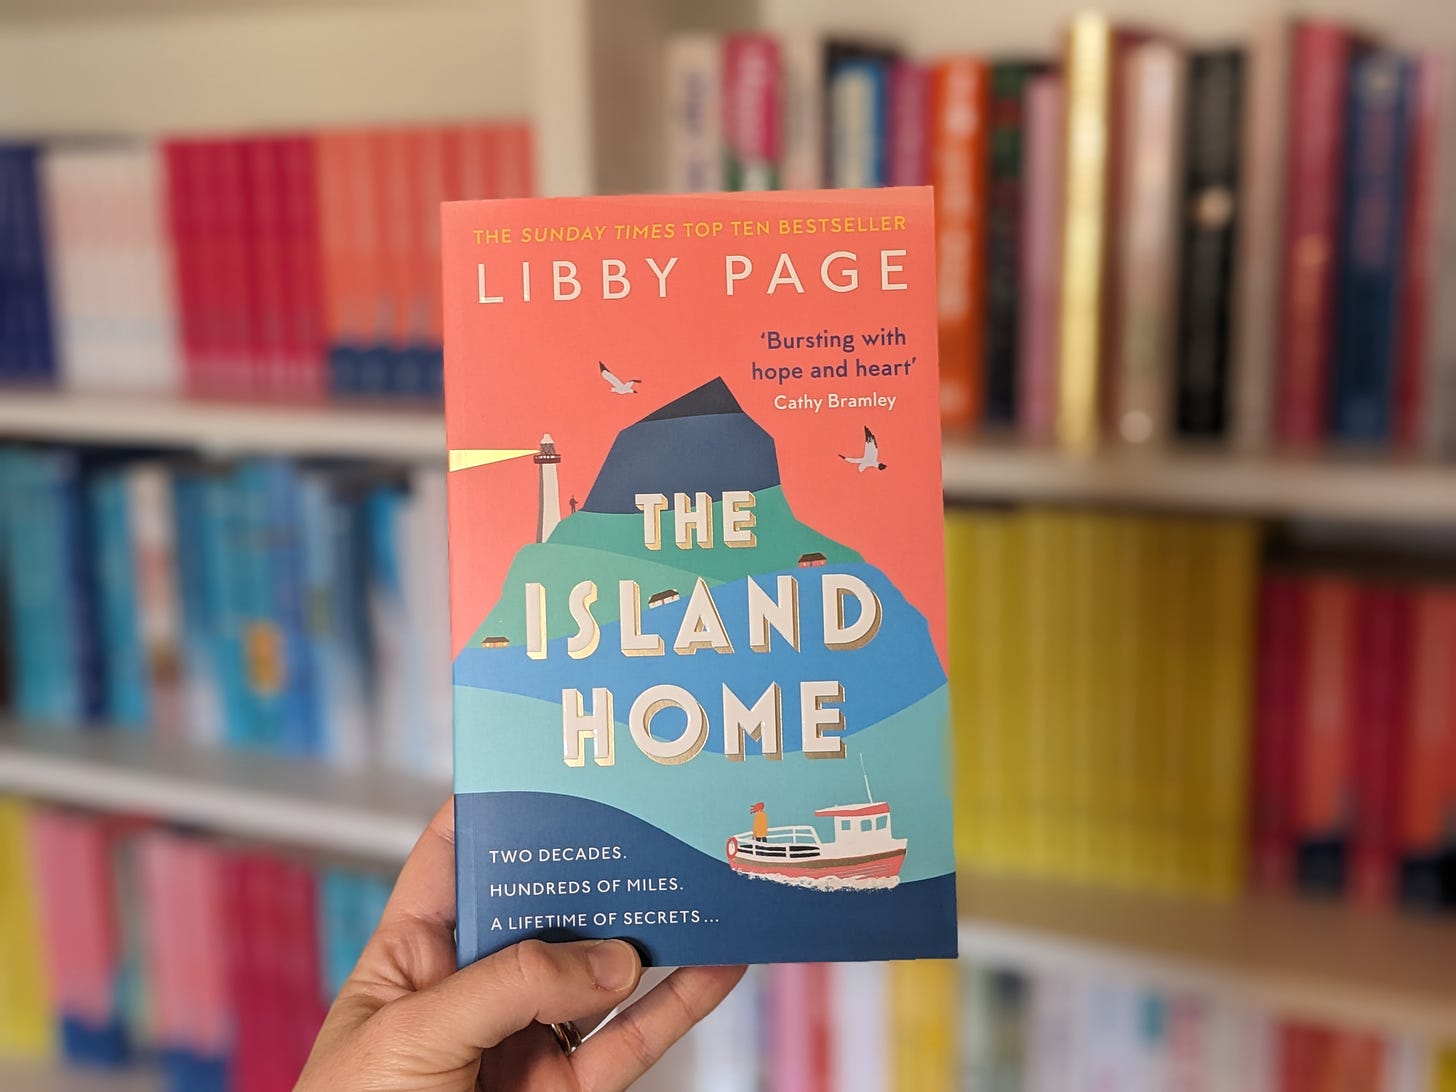 The cover for The Island Home by Libby Page is a salmon pink with an island in the middle in shades of blue. There is a lighthouse and an image of a woman heading towards the island on a boat.